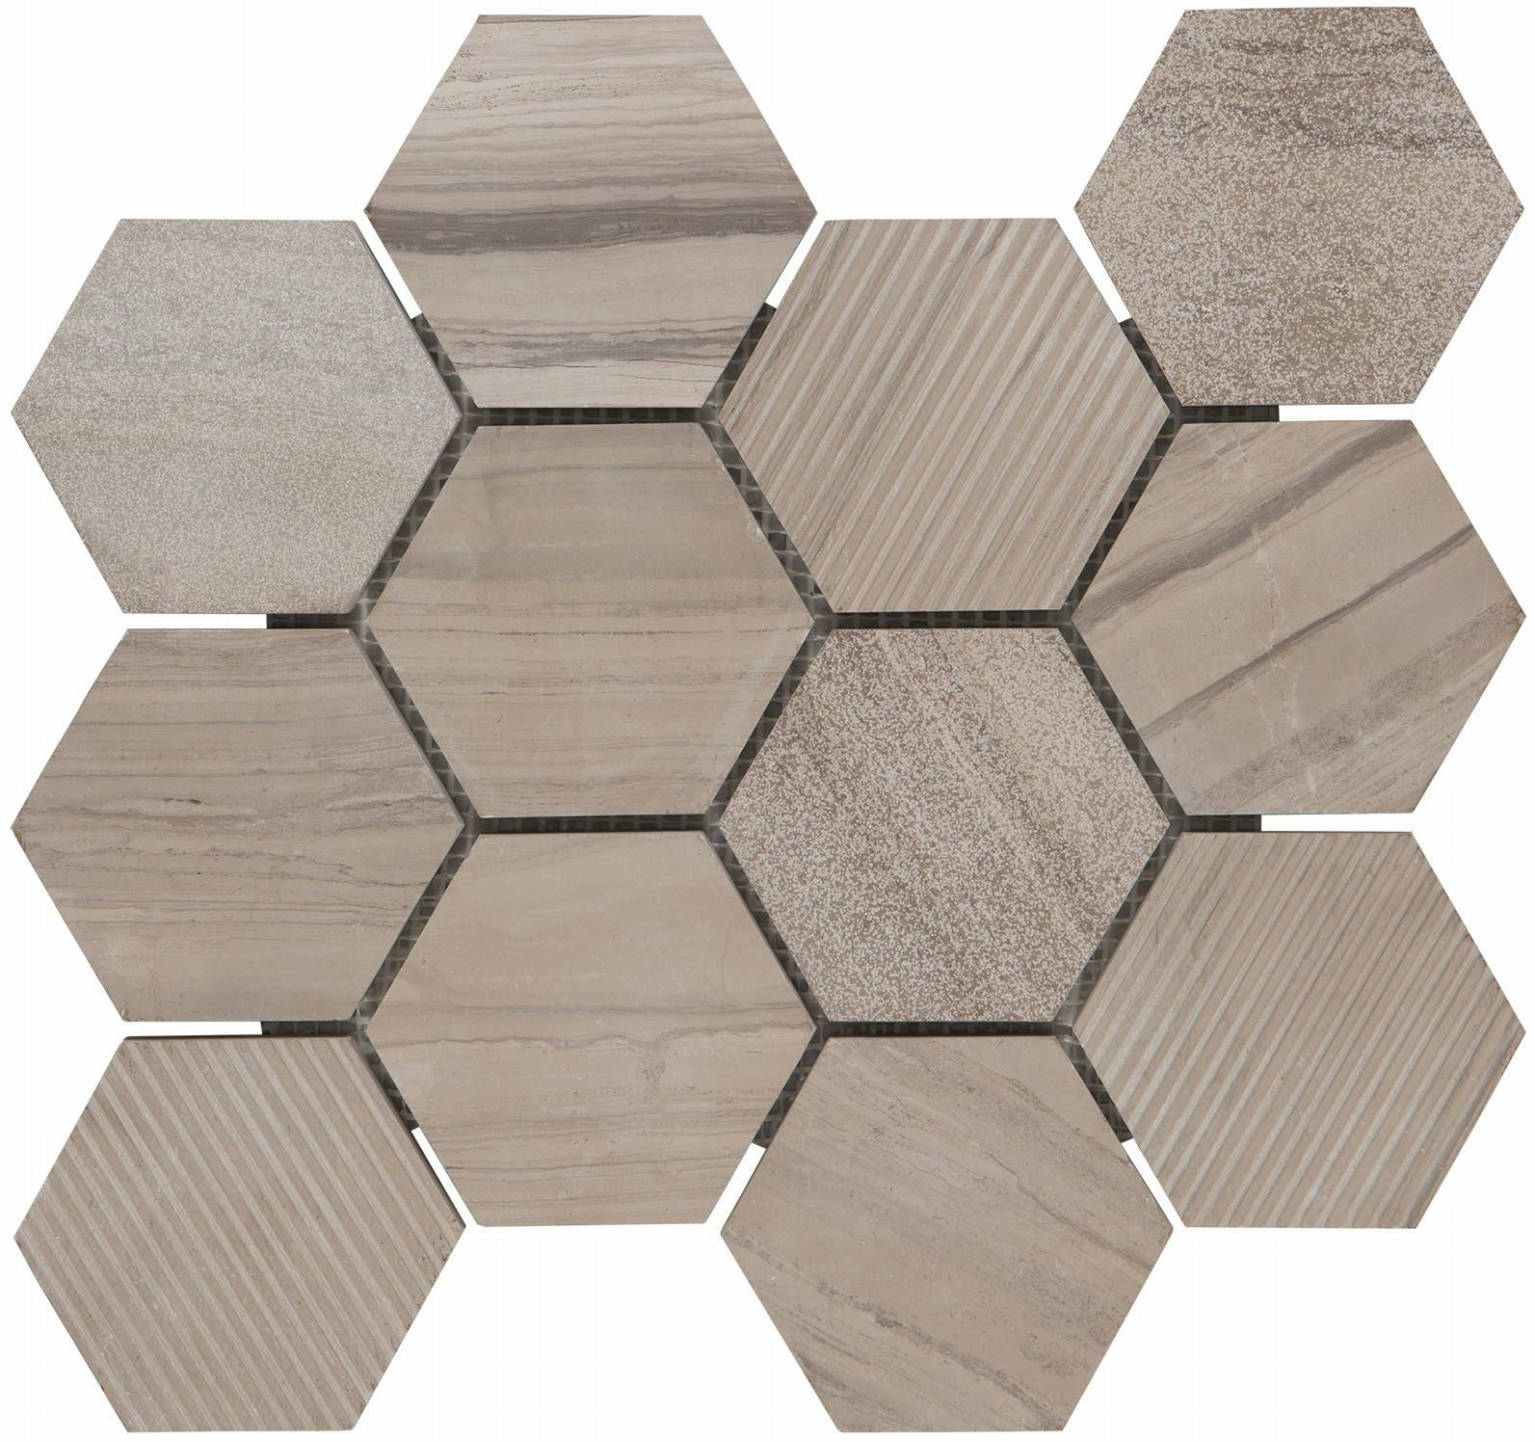 YS1511P | Stones & More | Finest selection of Mosaics, Glass, Tile and Stone